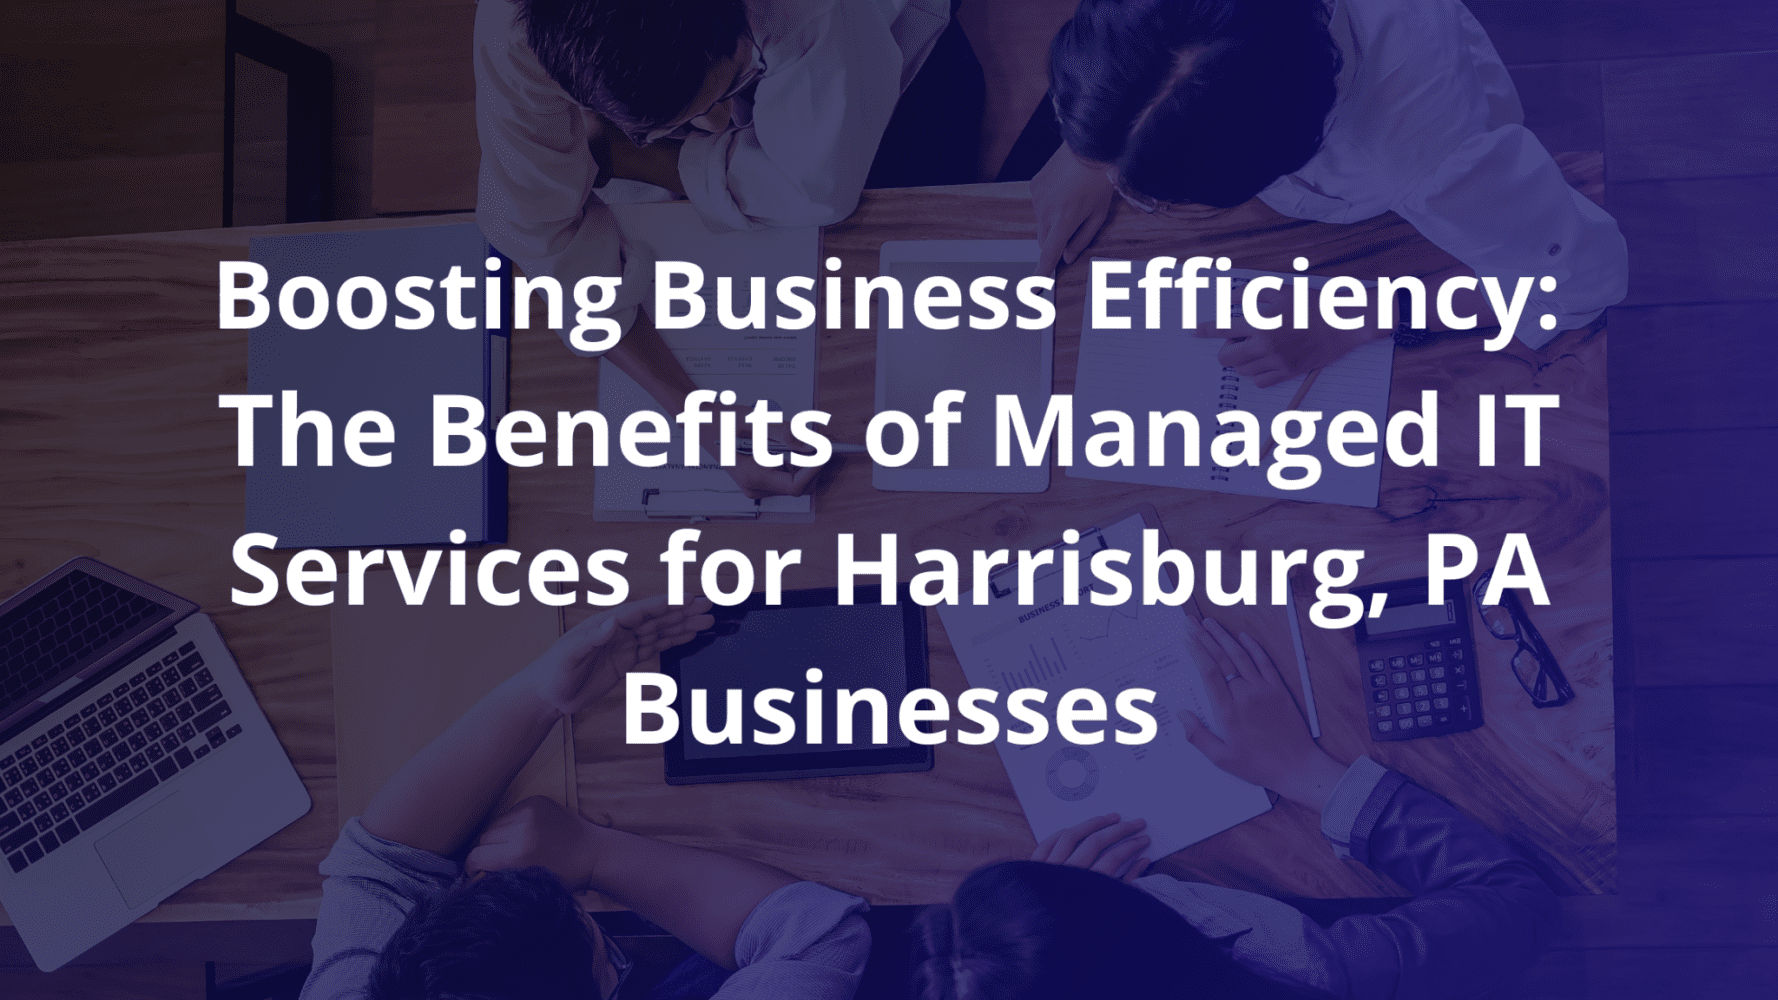 Boosting Business Efficiency: The Benefits of Managed IT Services for Harrisburg, PA Businesses